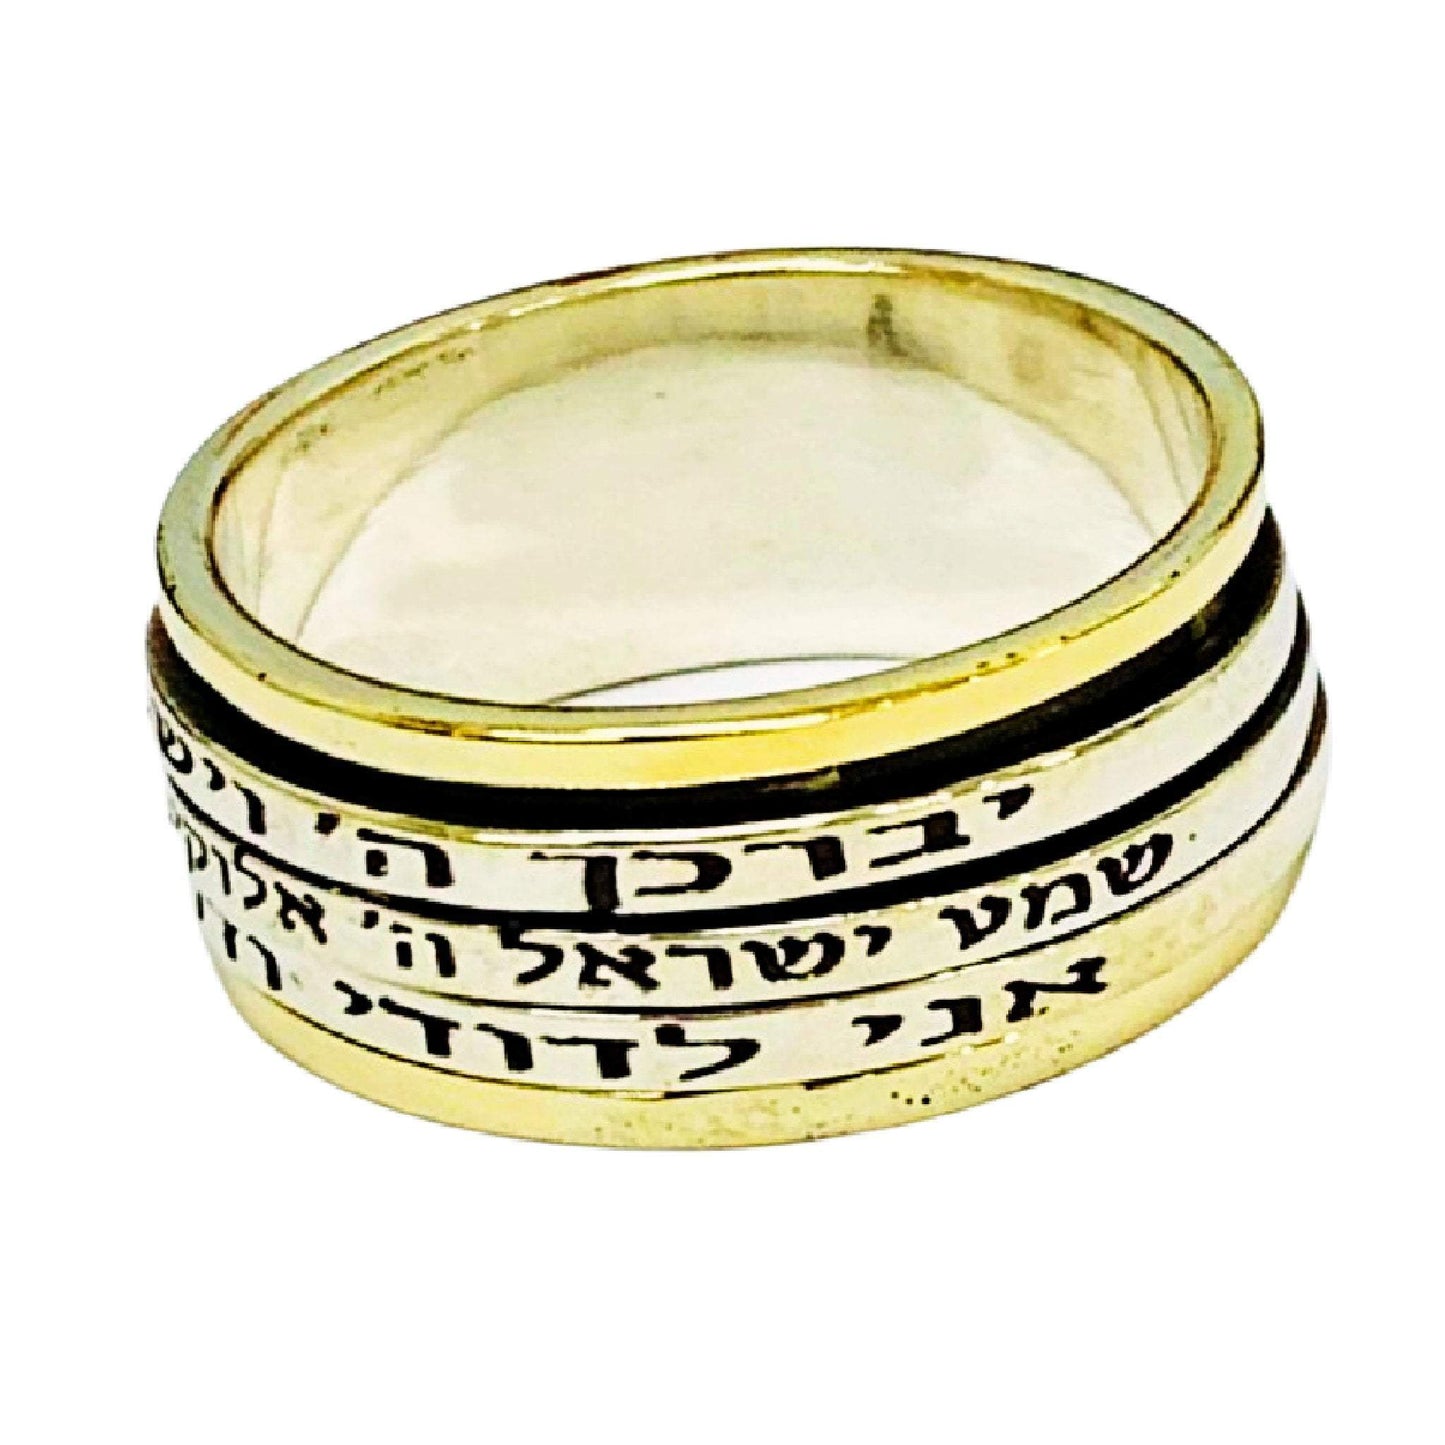 Bluenoemi Personalized Rings Jewelry made in Israel | Inspirational Ring Meditation Silver Gold Spinner Rings Blessing / Love Jewelry